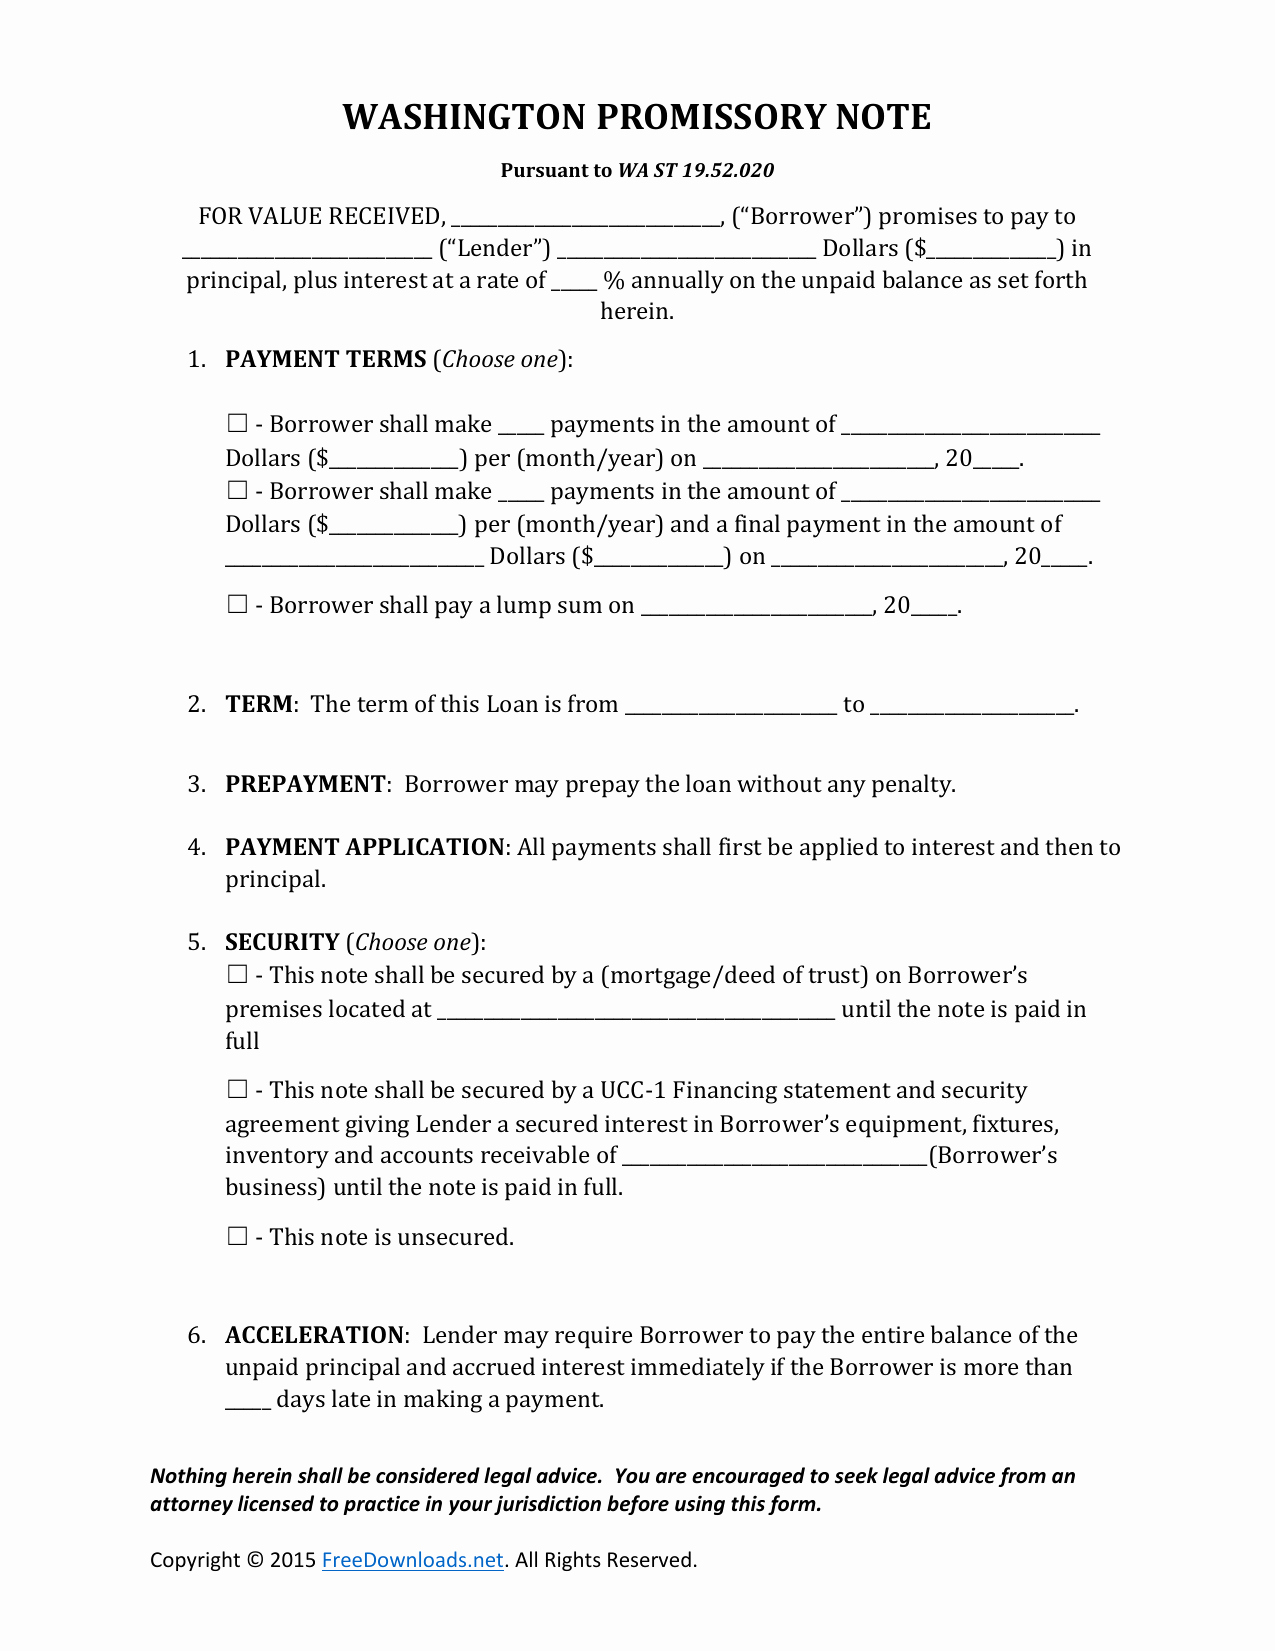 Free Secured Promissory Note Template Beautiful Download Washington Promissory Note form Pdf